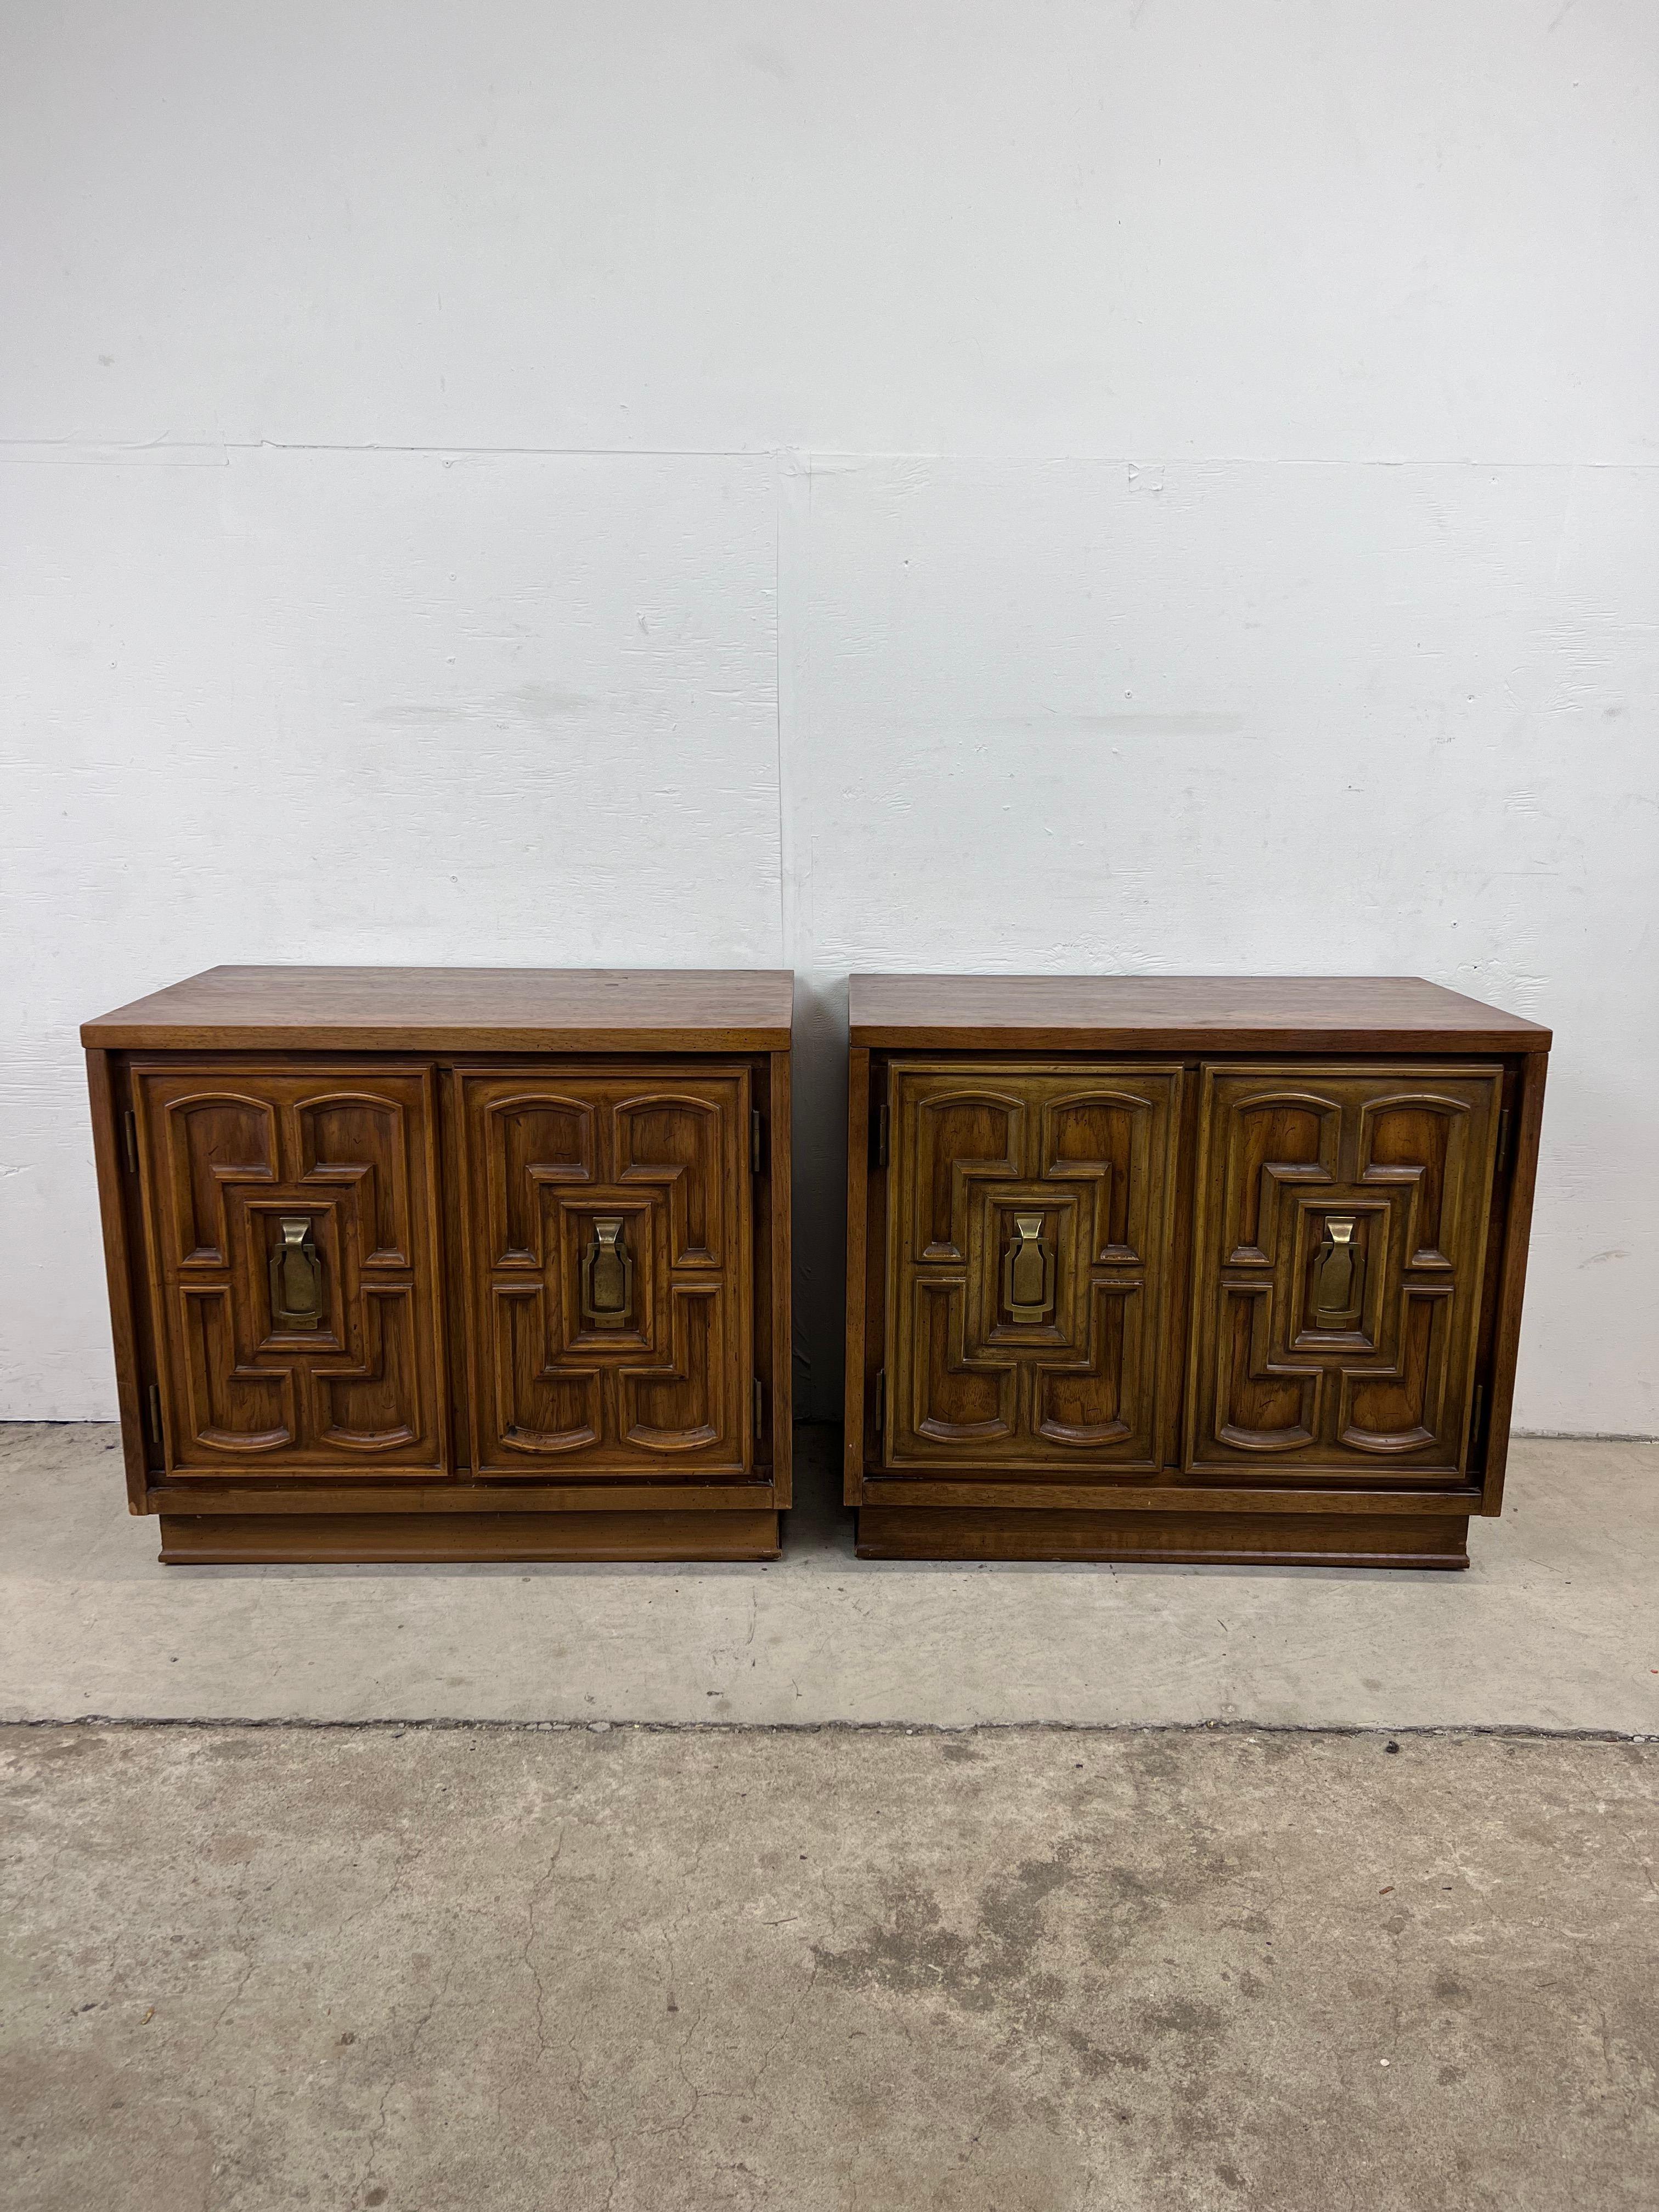 This pair of mid century Spanish Revival style nightstands feature hardwood construction, oakwood veneer with original finish, and two cabinet doors with brass hardware.?? 

   

